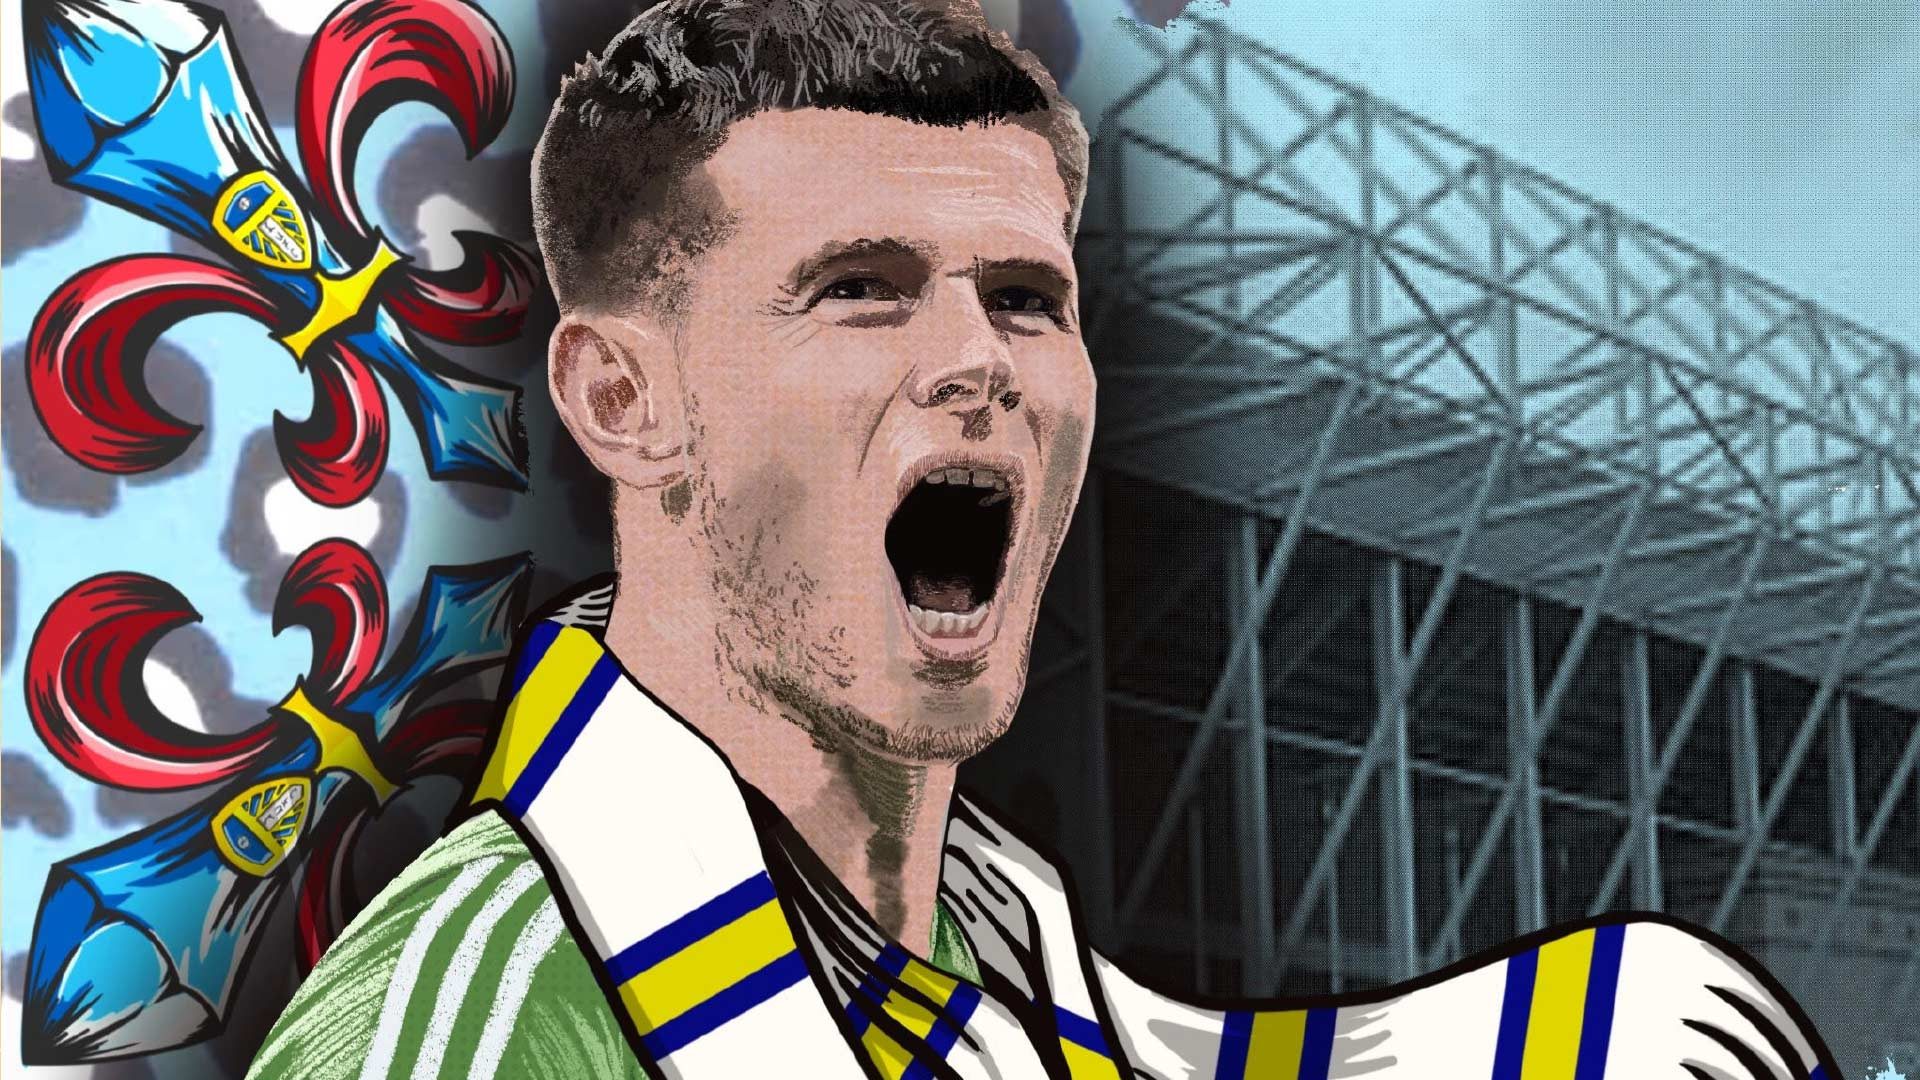 An illustration of Illan Meslier roaring while wearing a Leeds scarf in front of Elland Road